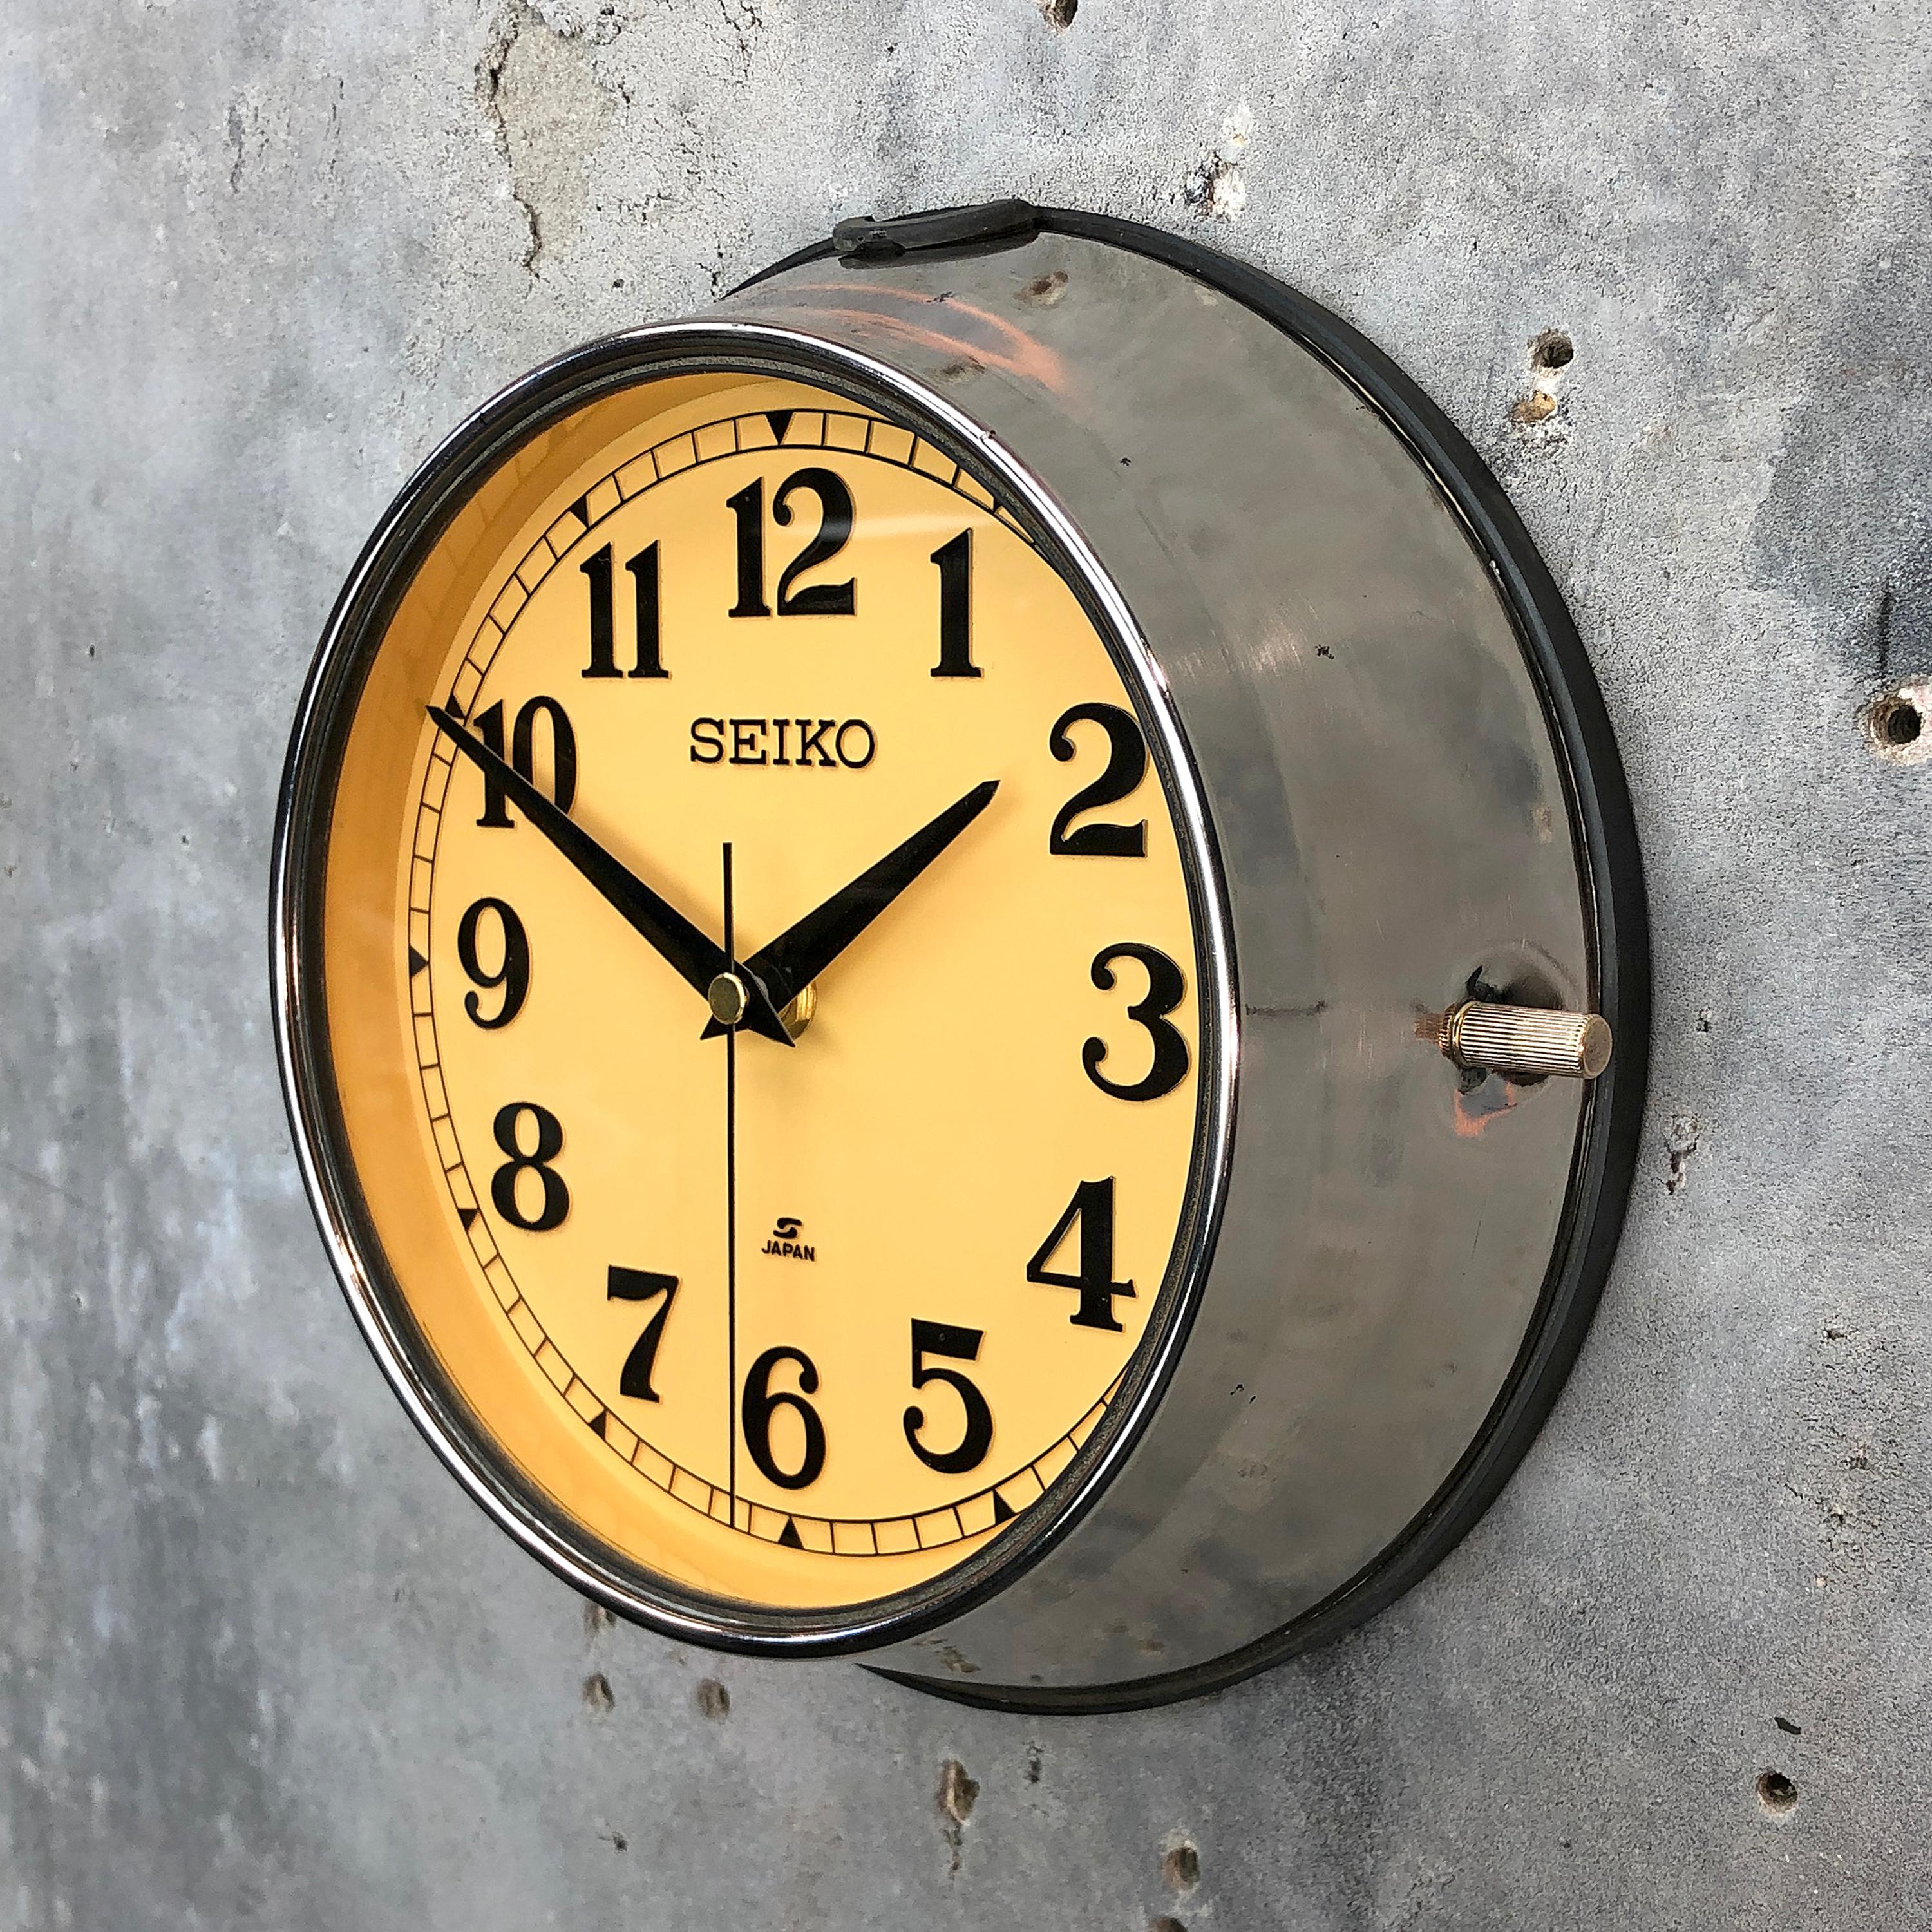 Seiko super tanker slave clock stripped and polished.

A reclaimed and restored maritime slave clock.

These clocks were used in great numbers on super tankers, cargo ships and military vessels built during the 1970s and housed a movement that would